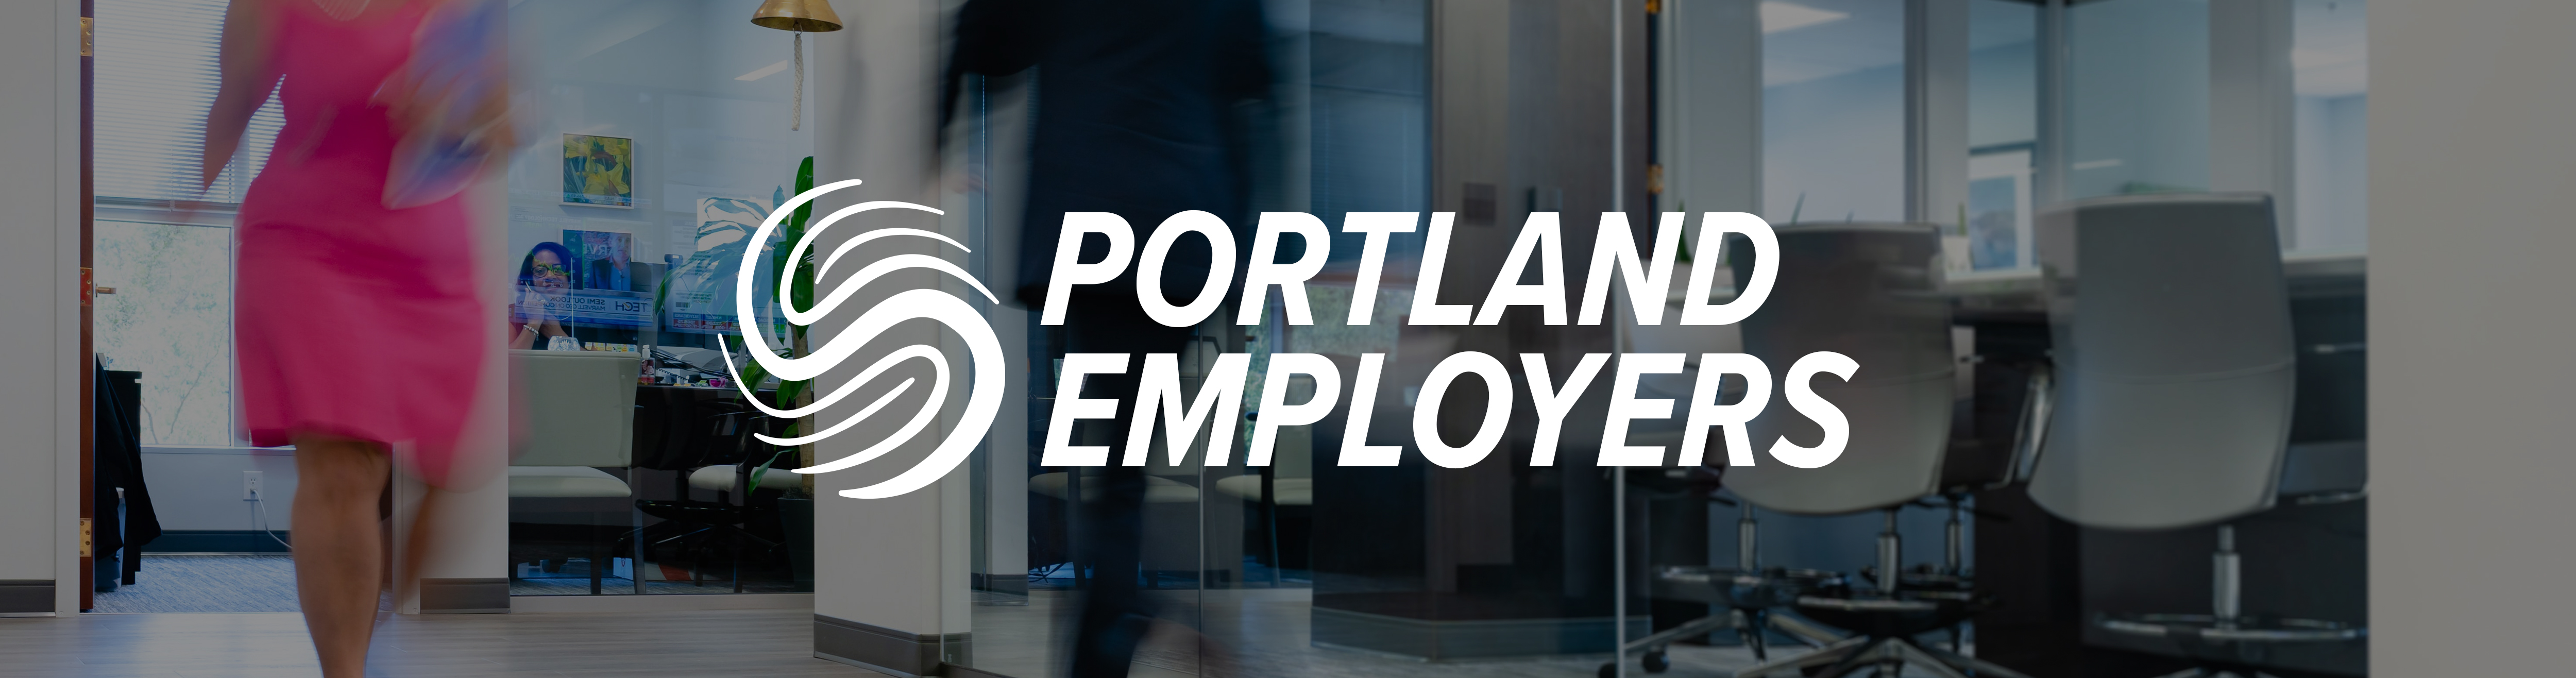 Employer Services, Corporate Staffing Firms in Portland, OR